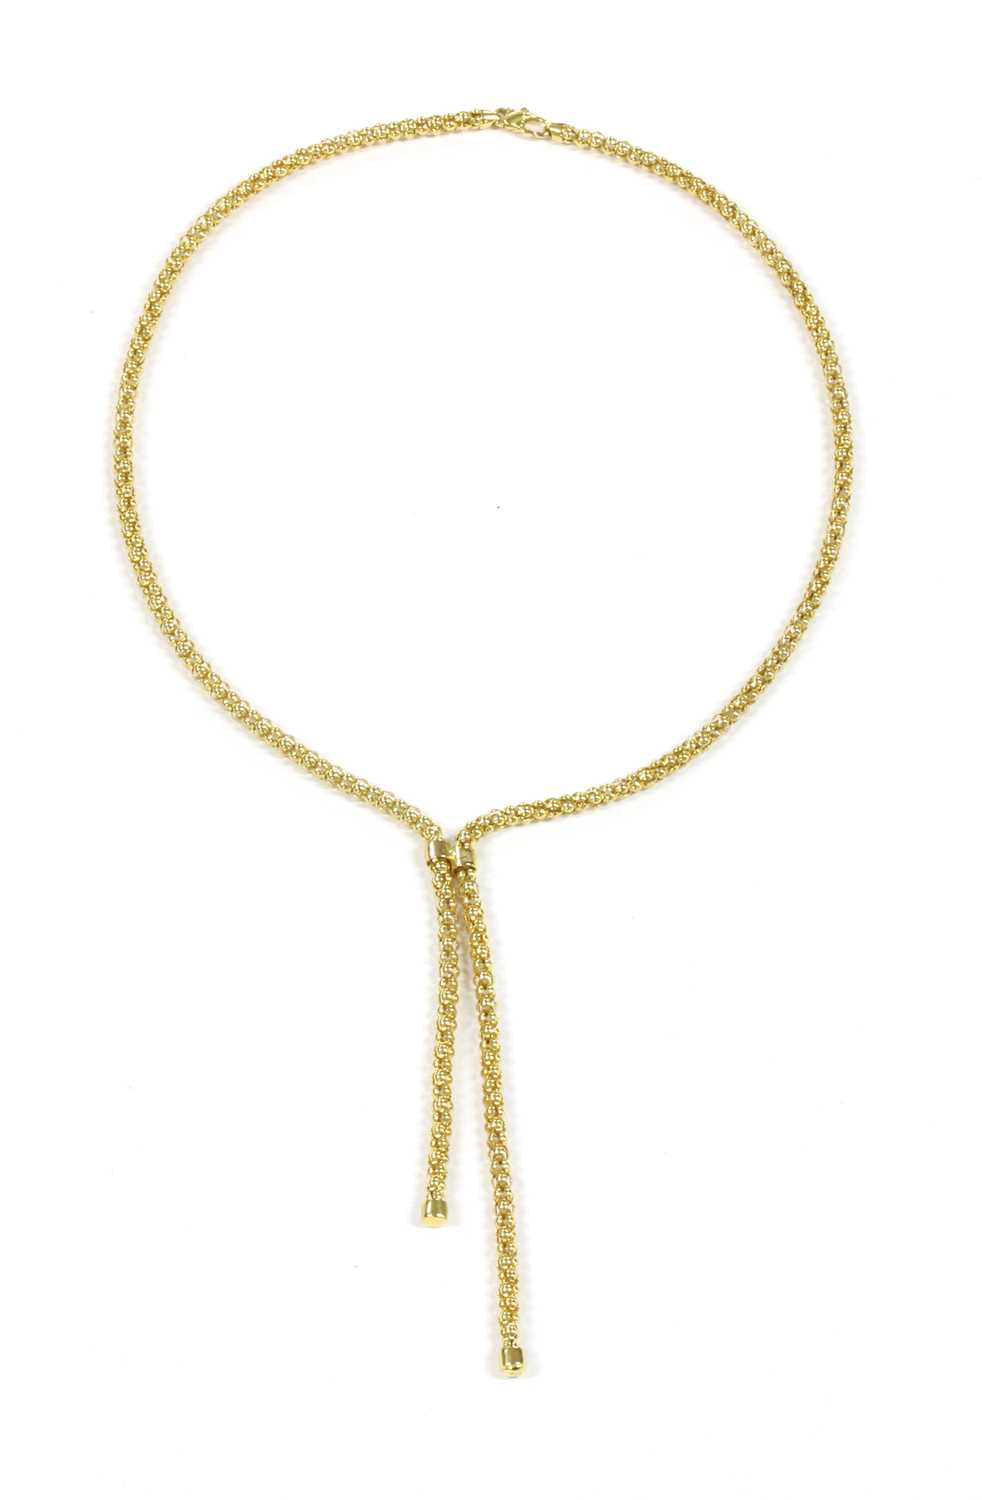 Lot 36 - A 9ct gold popcorn link lariat-style tassel necklace